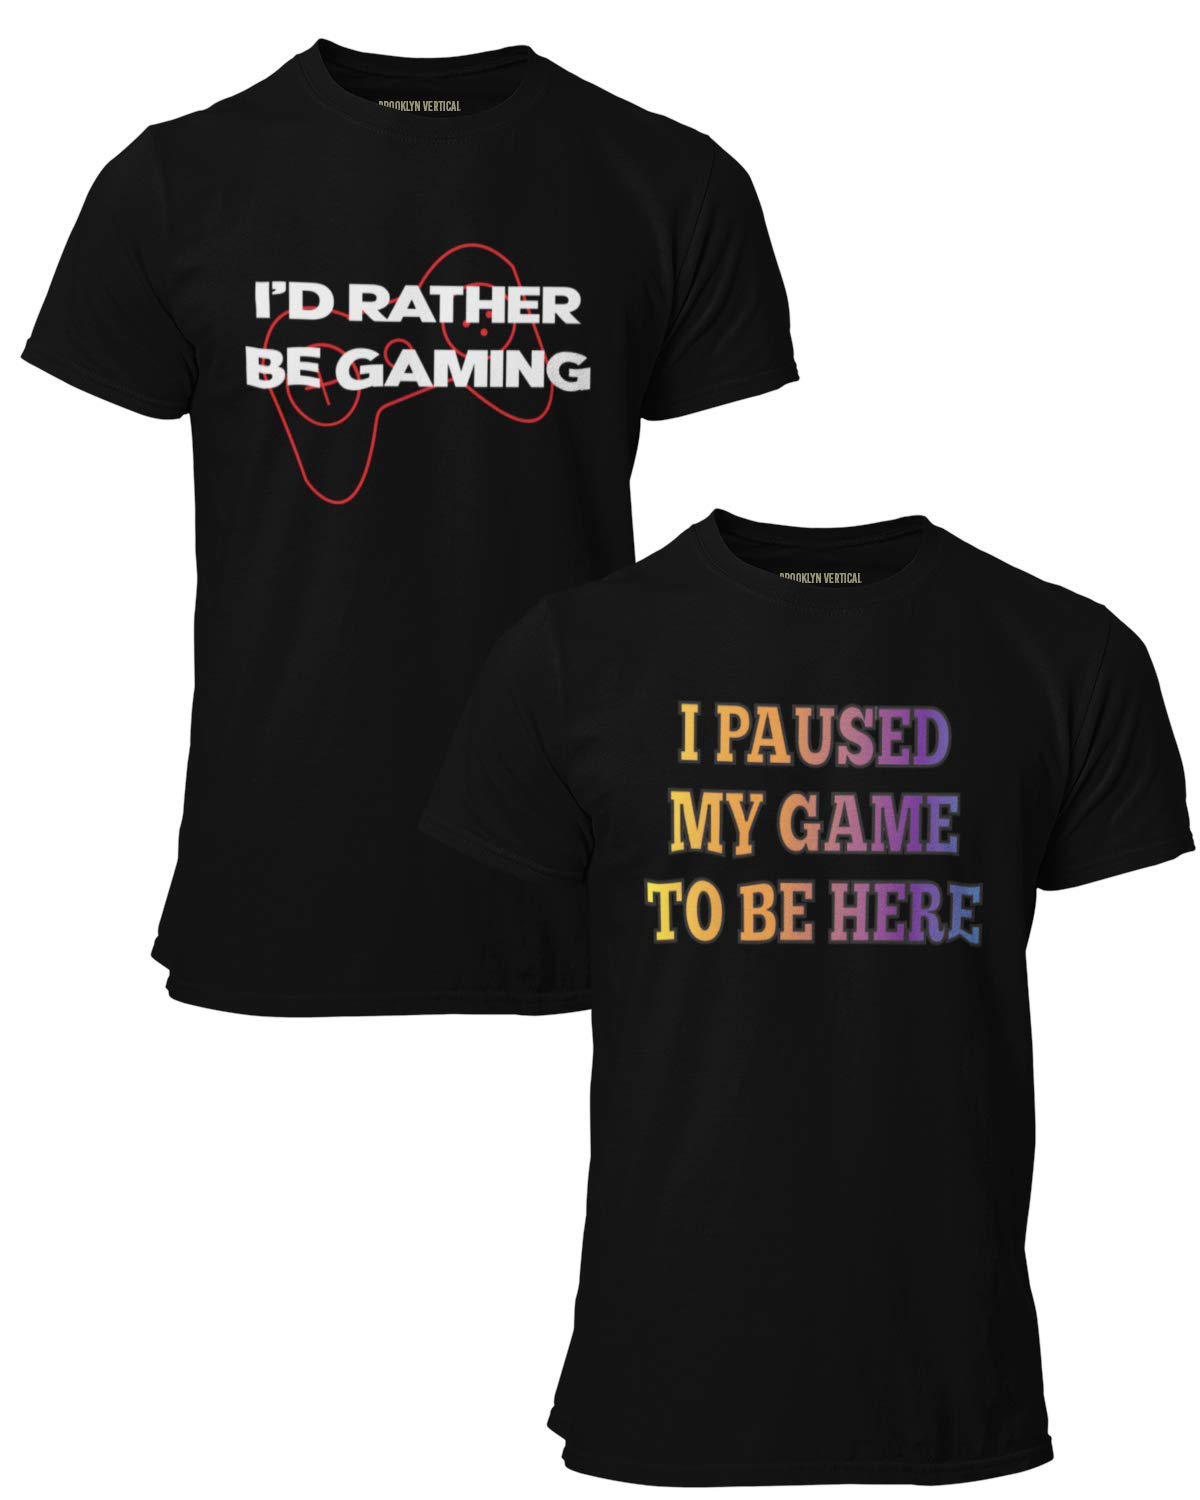 2-Pack Mens Video Gamer Gaming Short Sleeve Crew Neck T-Shirt| Soft Cotton Graphic Tees Sizes S-XL